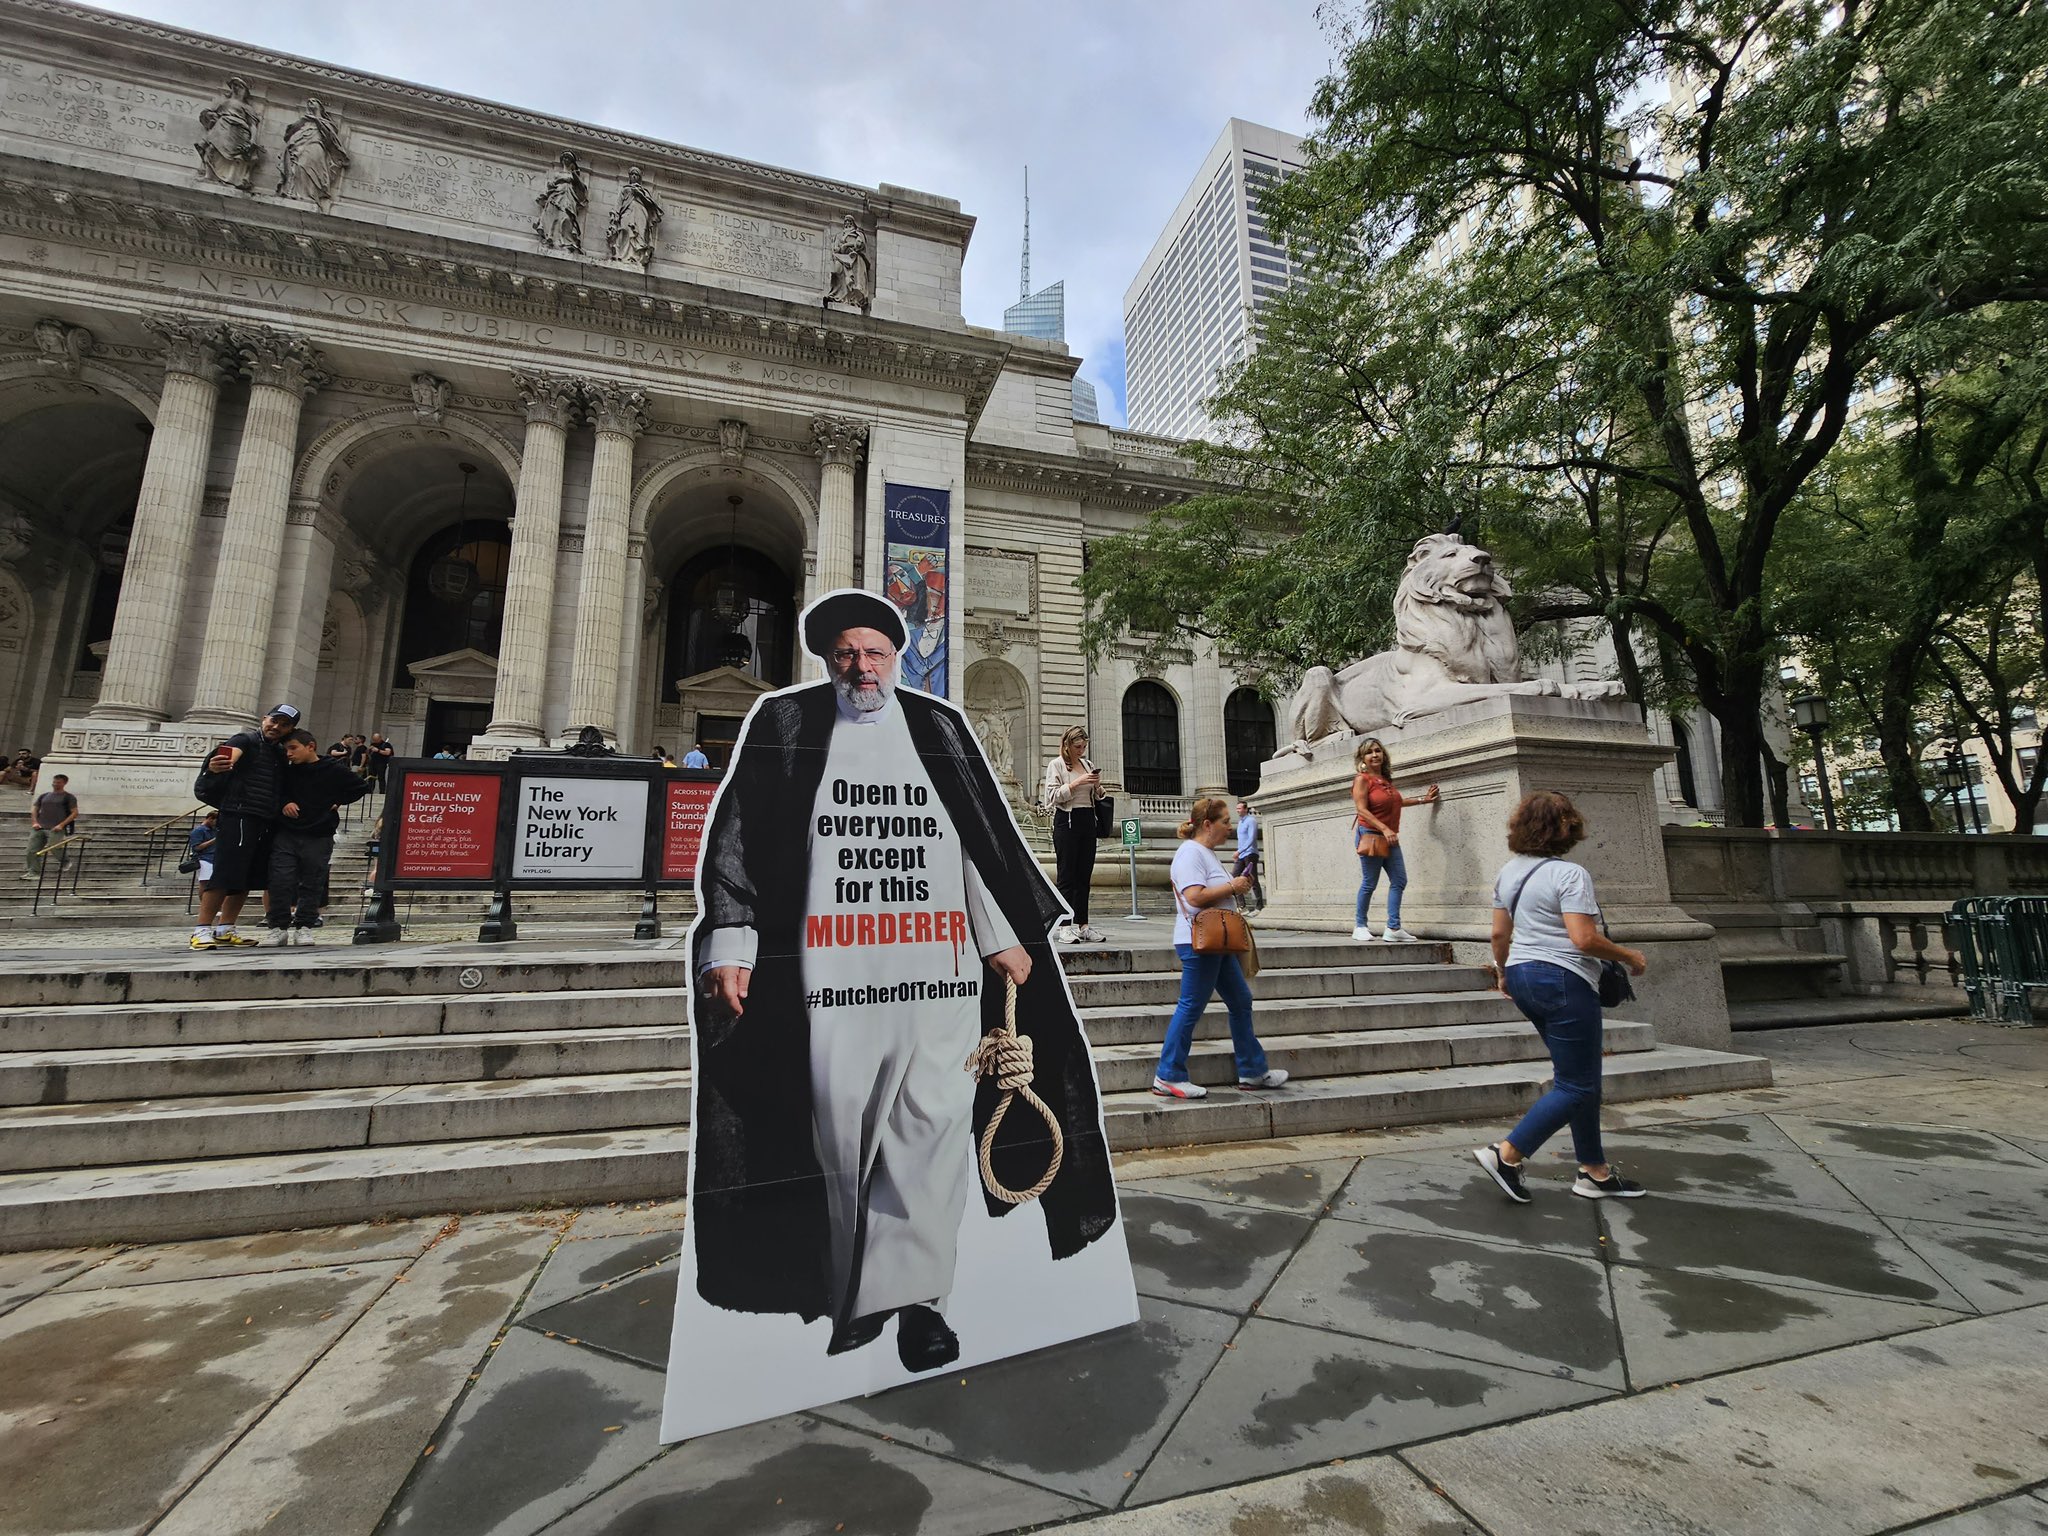 Life size cutouts of Iran's President Ebrahim Raisi placed around New York by Israel's Foreign Ministry.